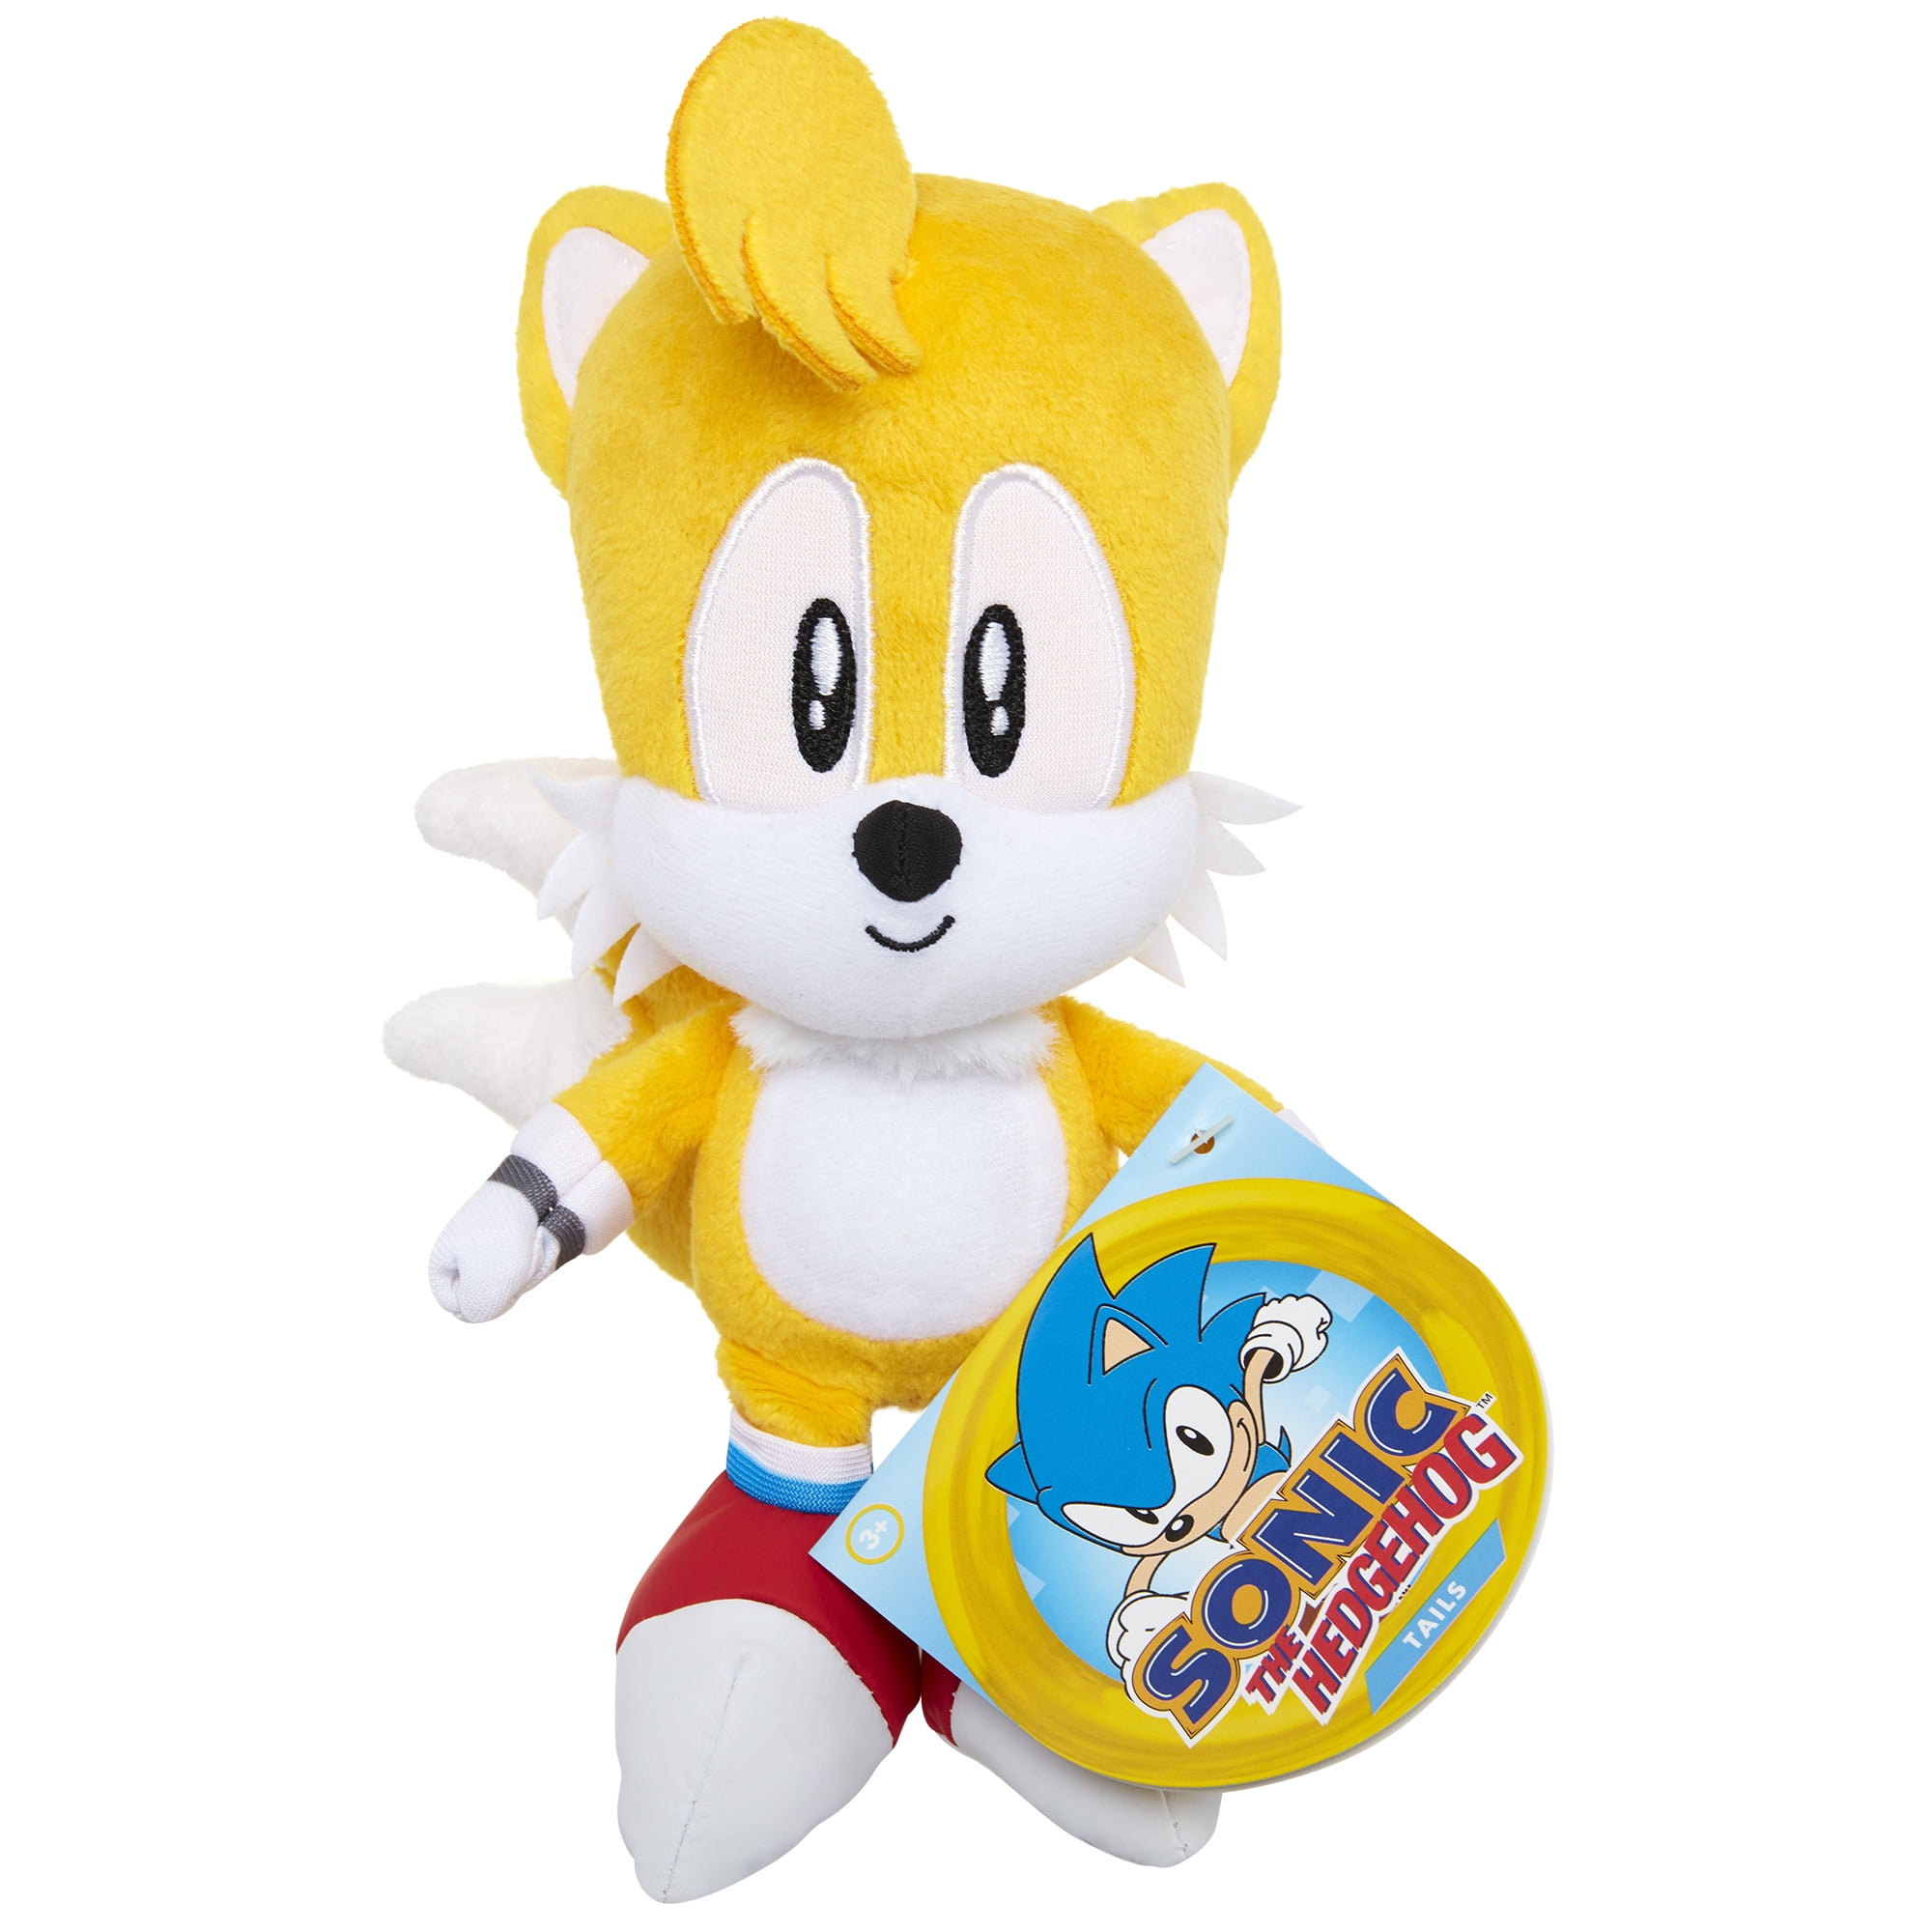 Sonic The Hedgehog Knuckles 11.5" Tall Plush Soft Toys 